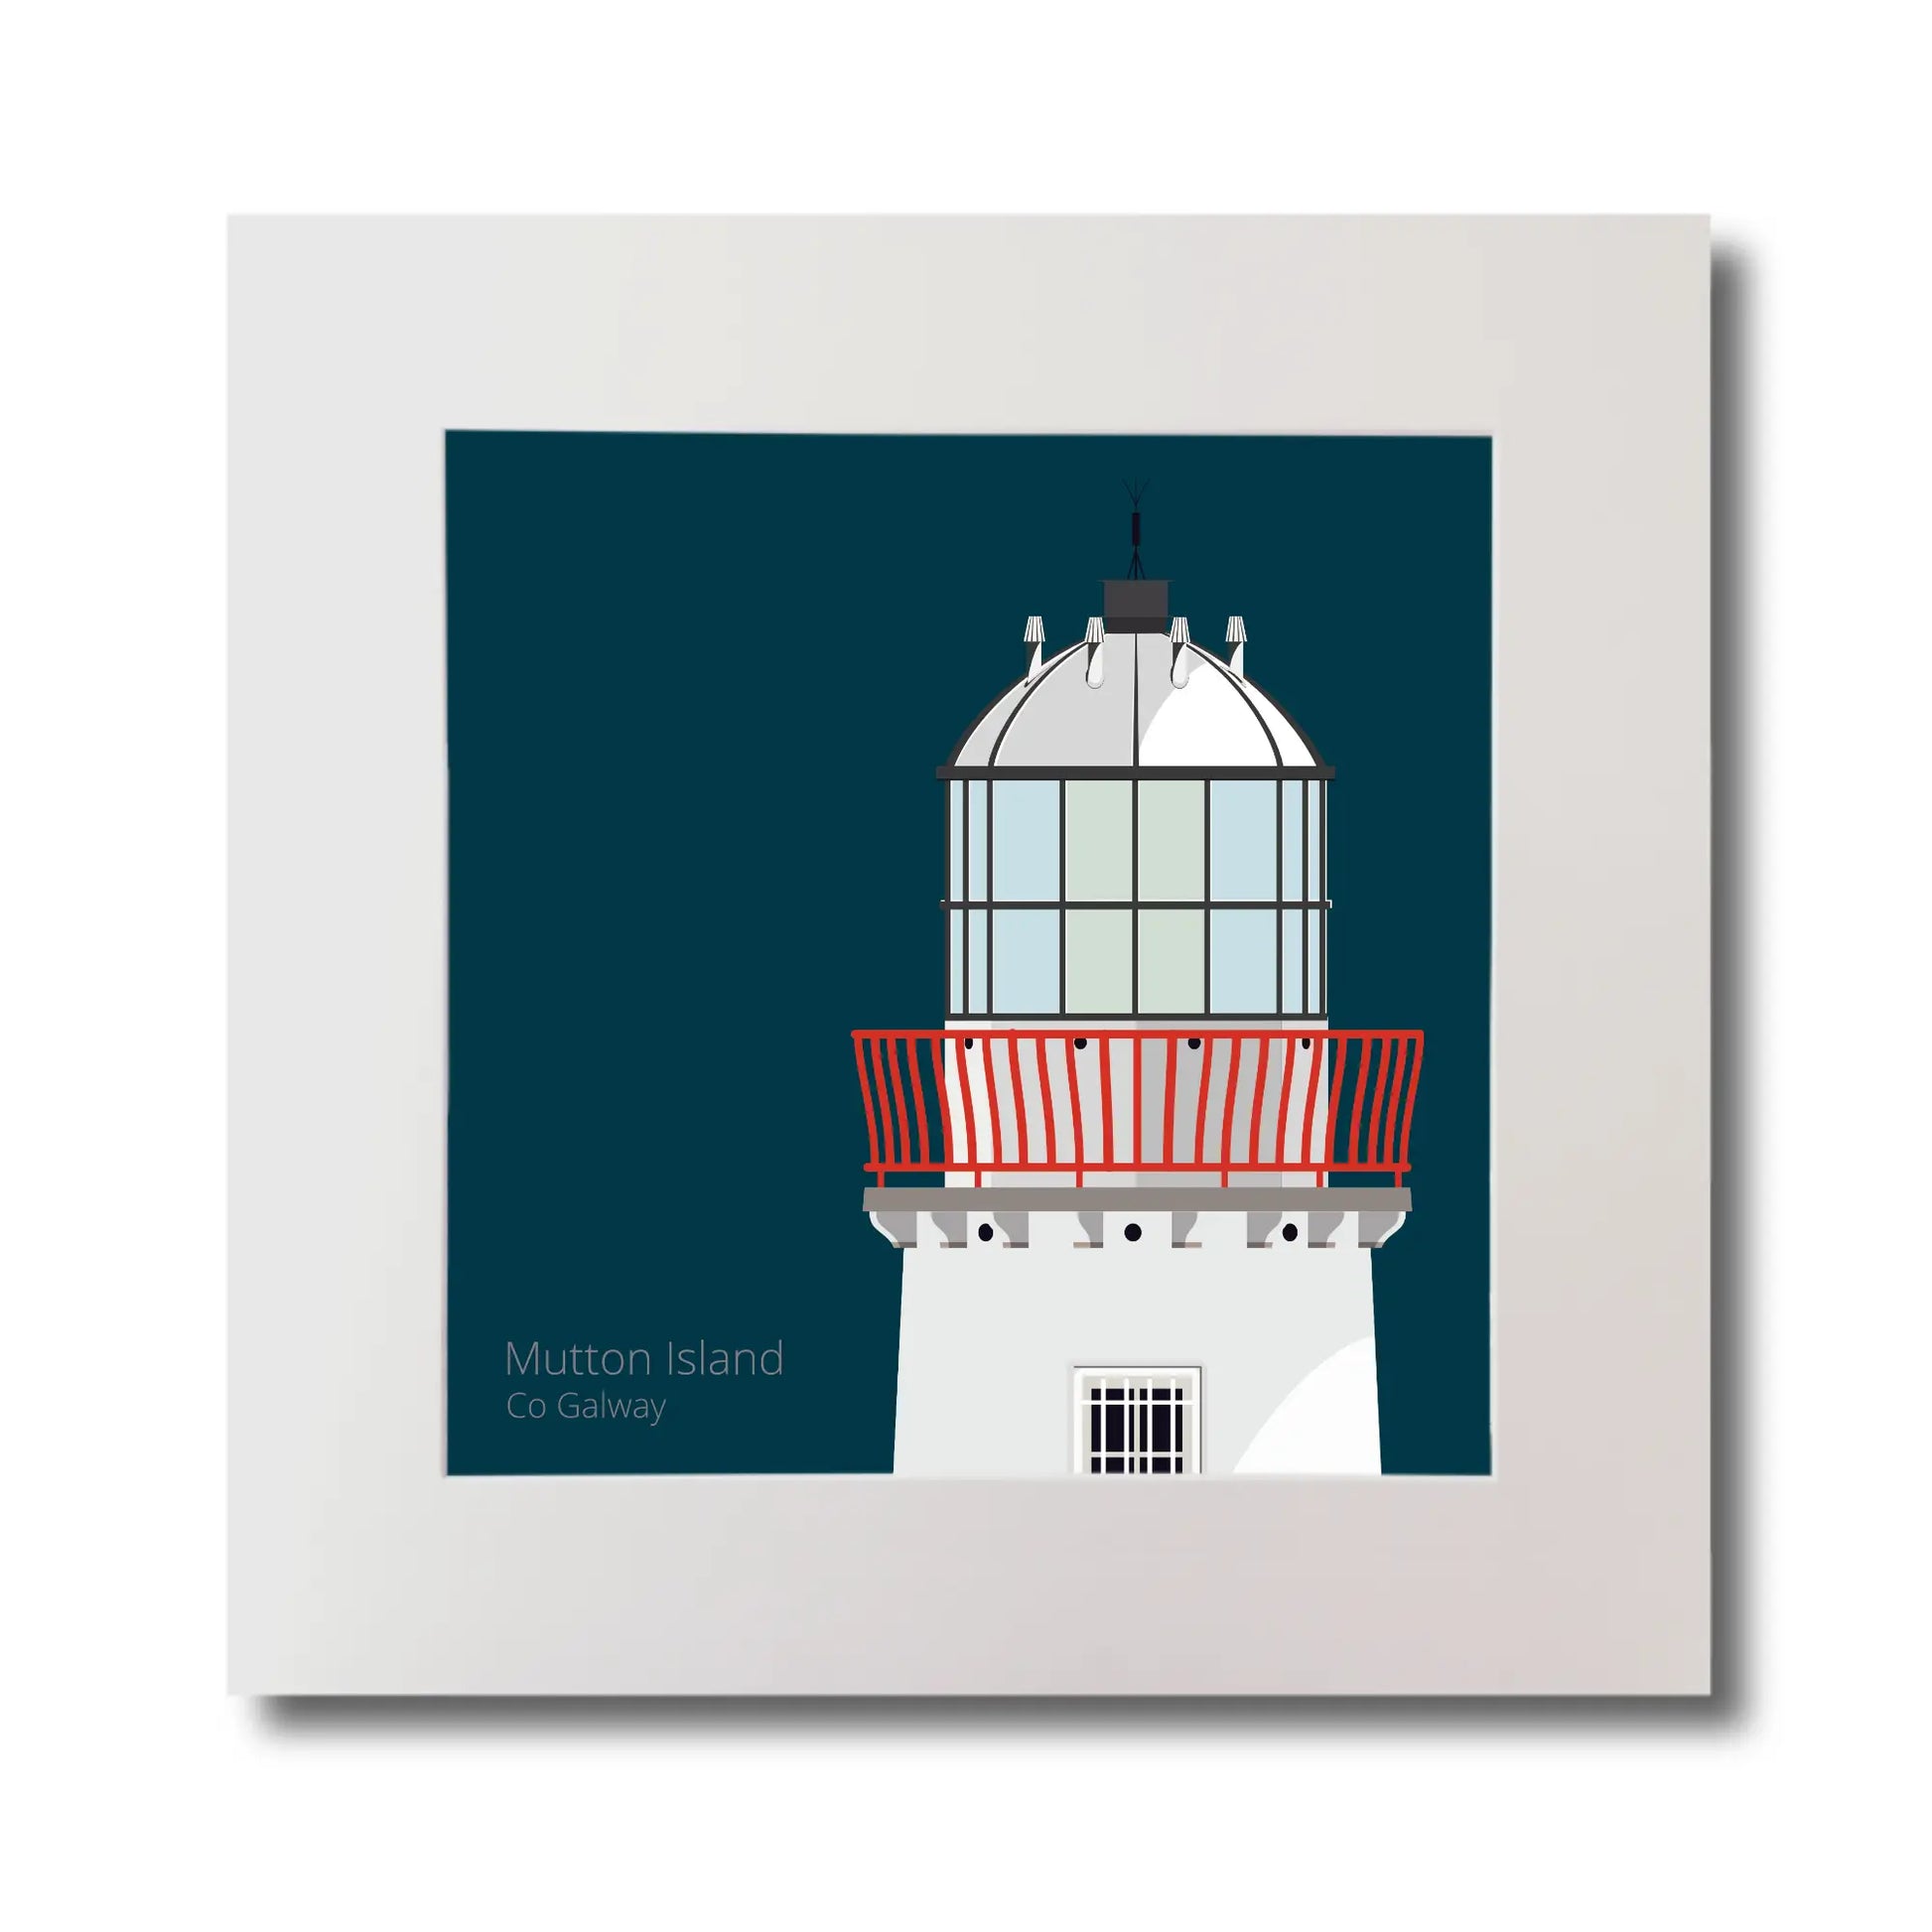 Illustration of Mutton Island lighthouse on a midnight blue background, mounted and measuring 30x30cm.